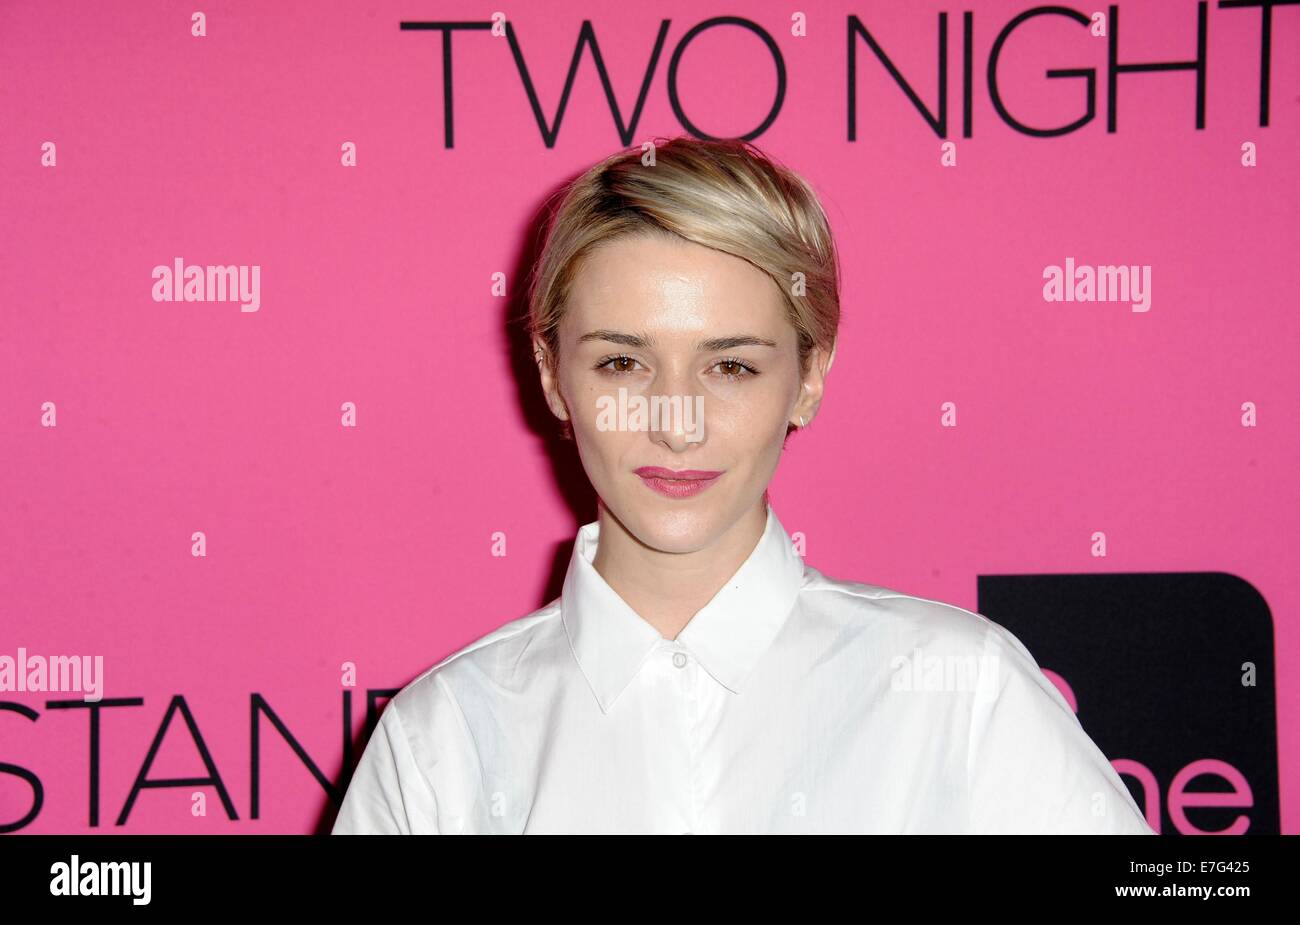 Los Angeles, CA, USA. 16th Sep, 2014. Addison Timlin at arrivals for TWO NIGHT STAND Premiere, TCL Chinese 6 Theatres (formerly Grauman's), Los Angeles, CA September 16, 2014. Credit:  Dee Cercone/Everett Collection/Alamy Live News Stock Photo